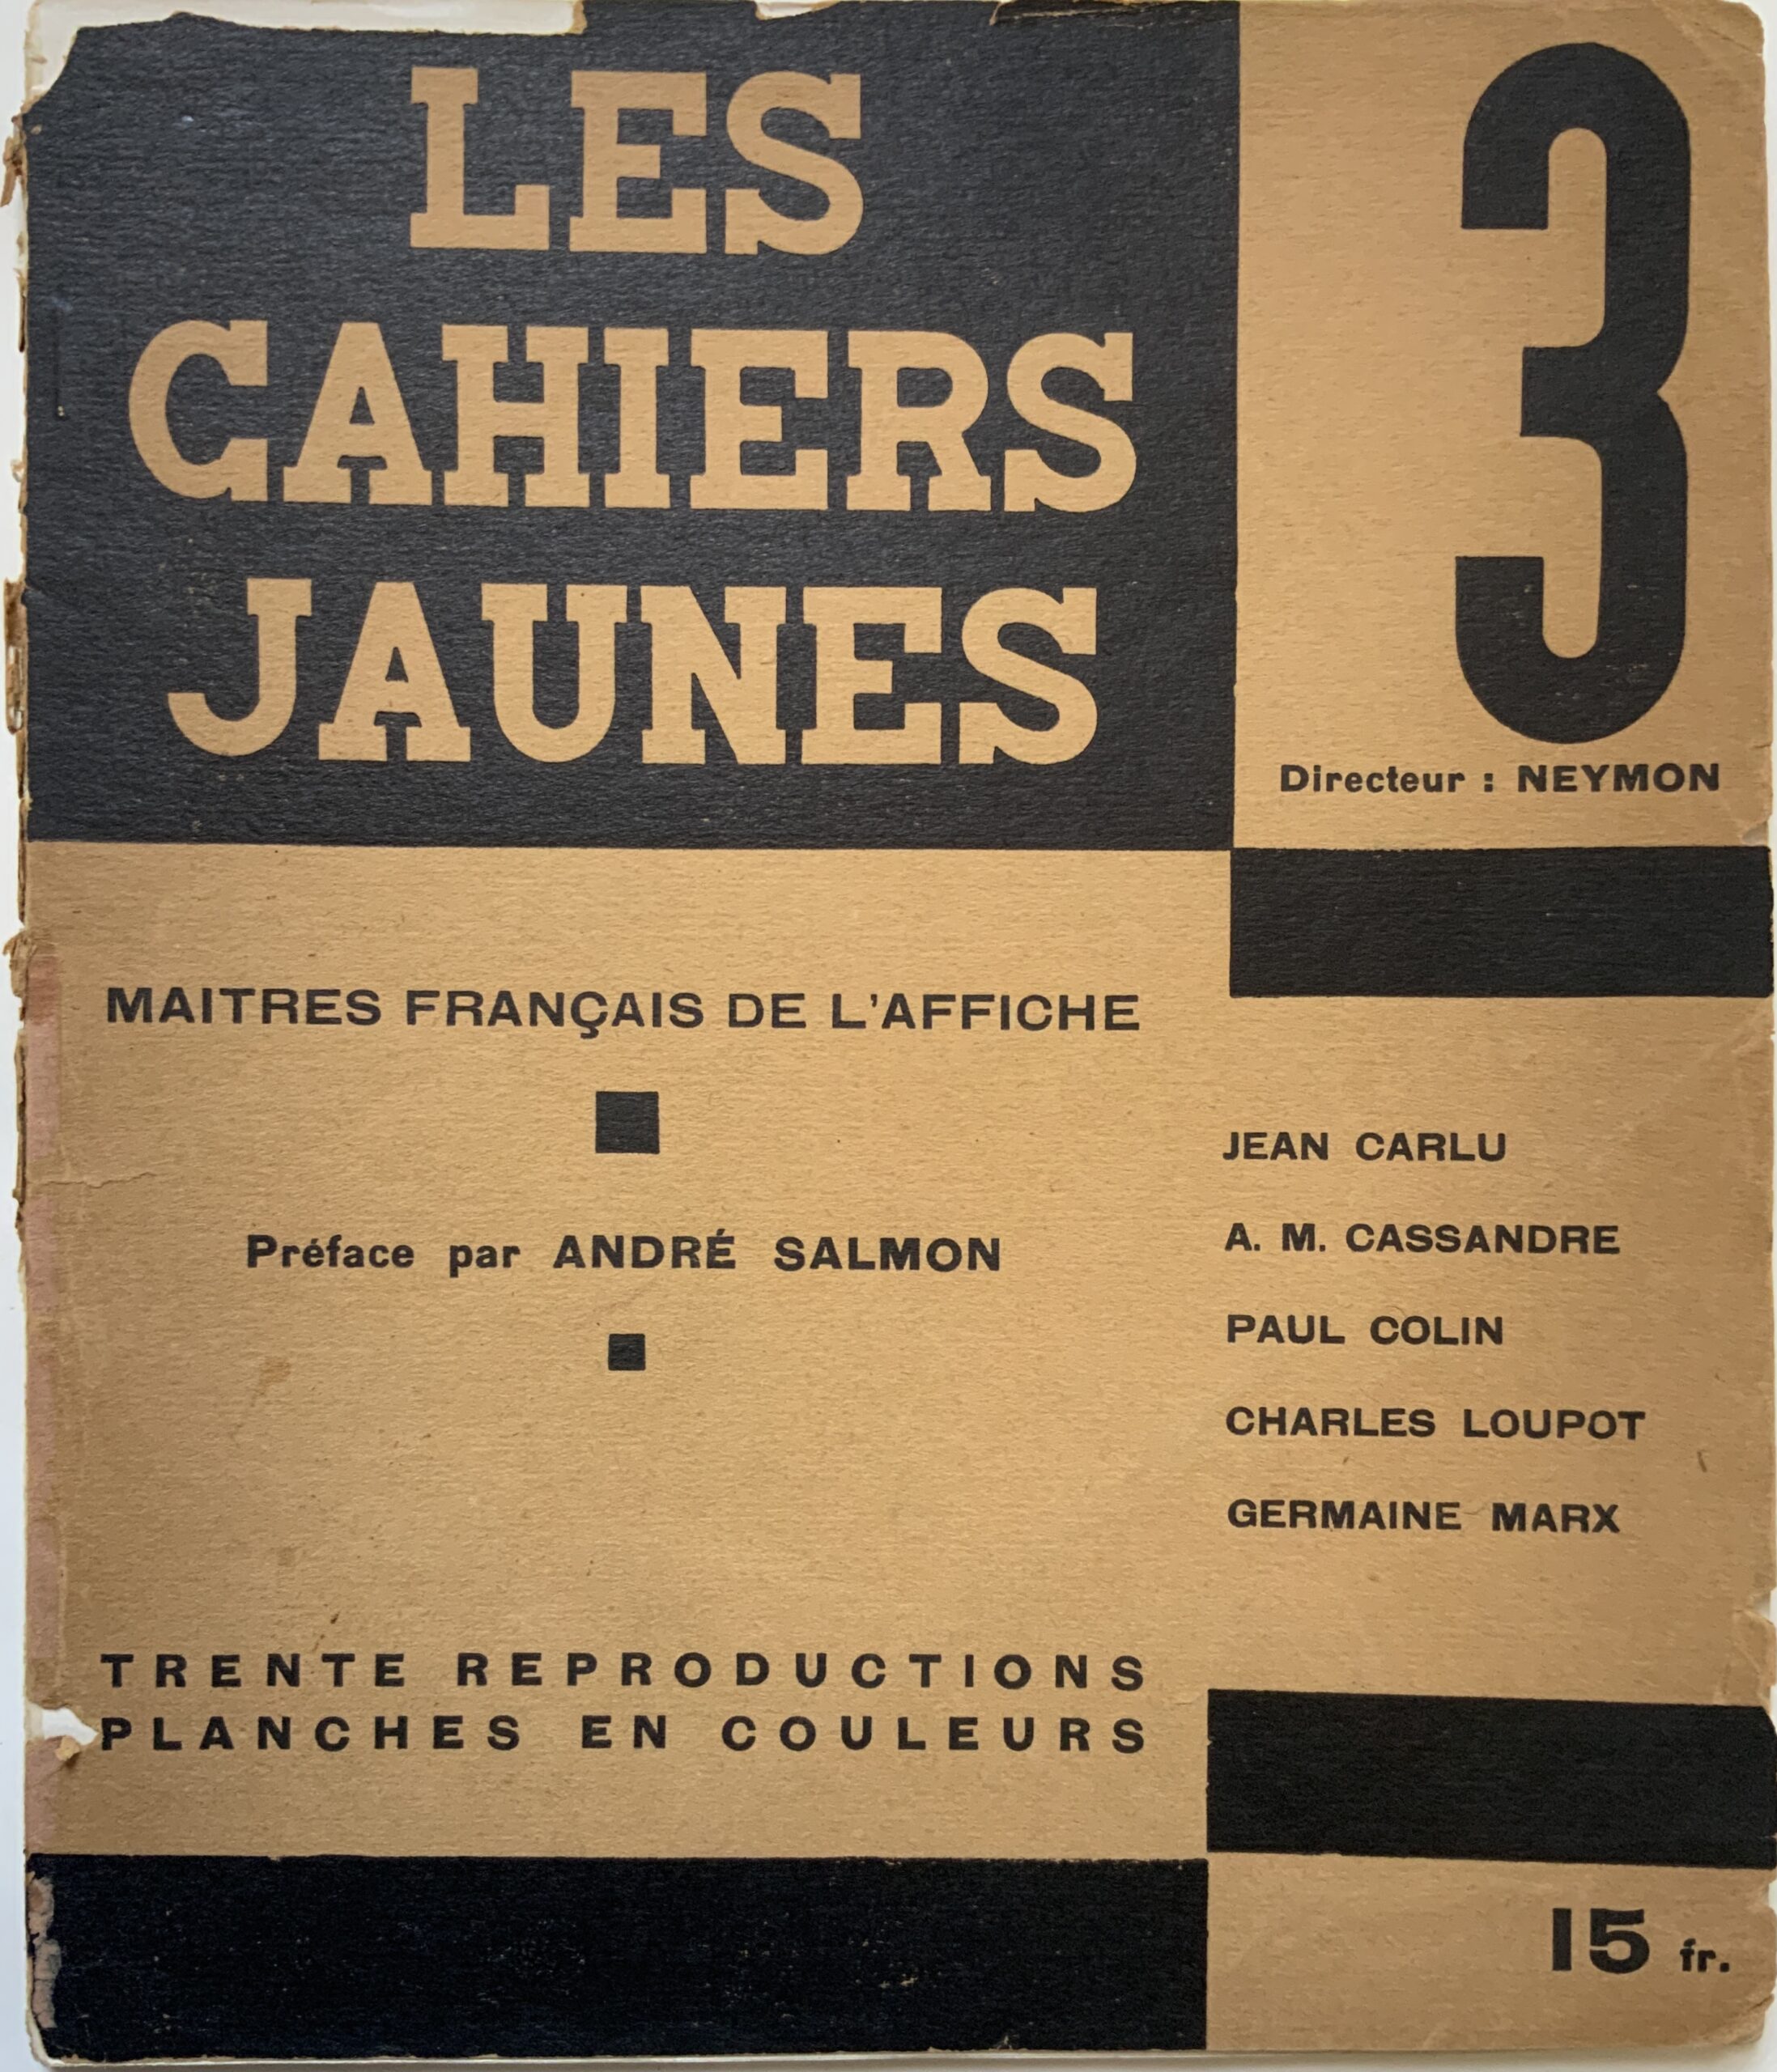 M275	LES CAHIERS JAUNES - “THE YELLOWS NOTEBOOKS”